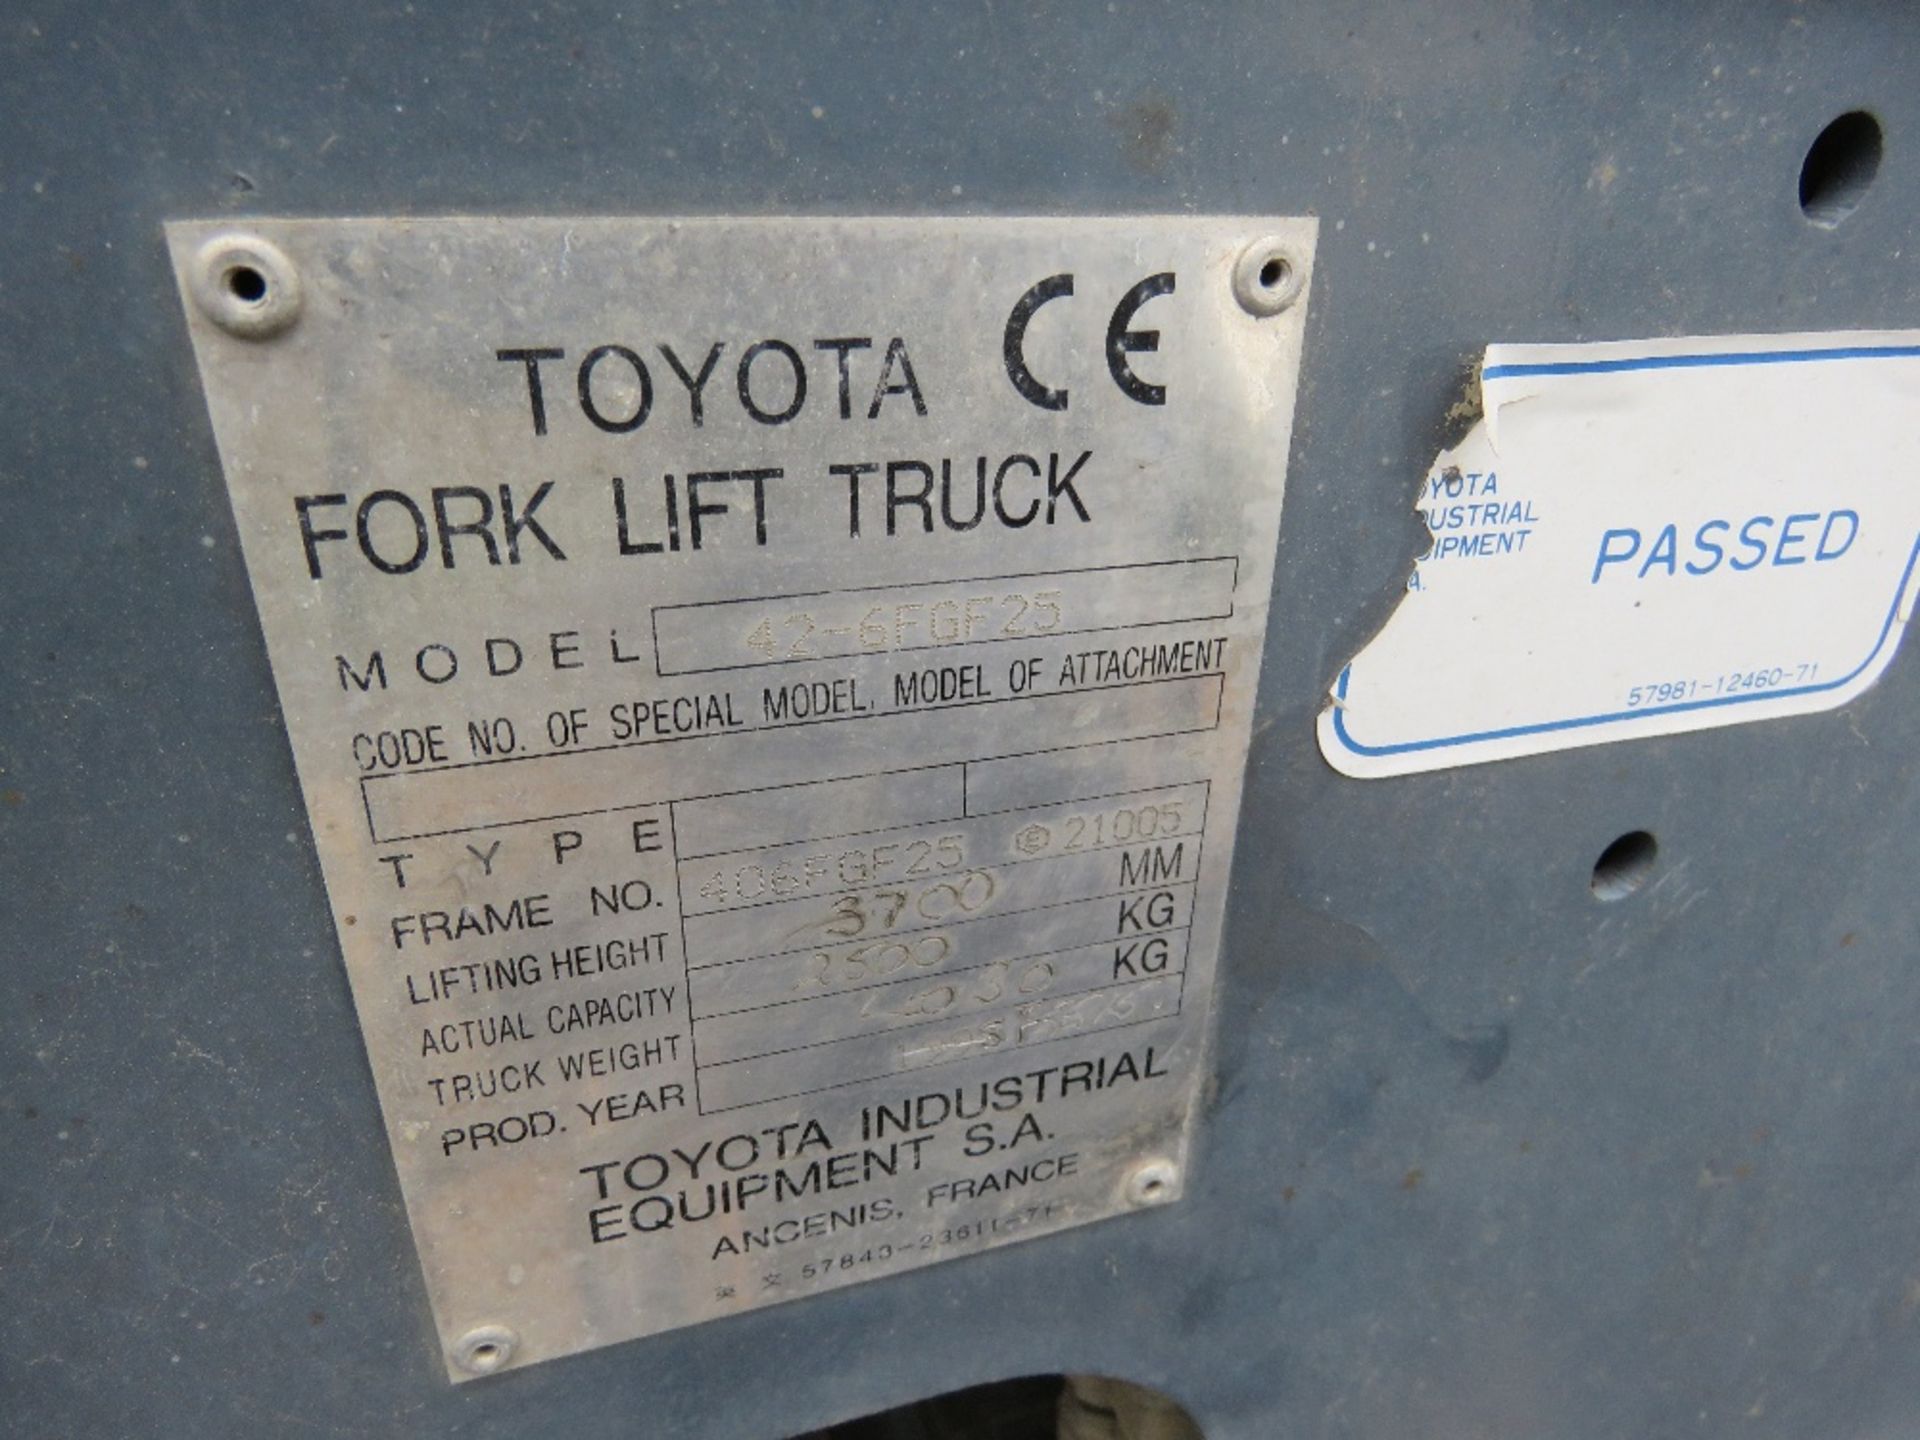 TOYOTA 25 GAS FORKLIFT TRUCK WITH SIDE SHIFT. 8994 REC HOURS. SN:406FGF25@21005 WHEN TESTED WAS SEE - Image 7 of 11